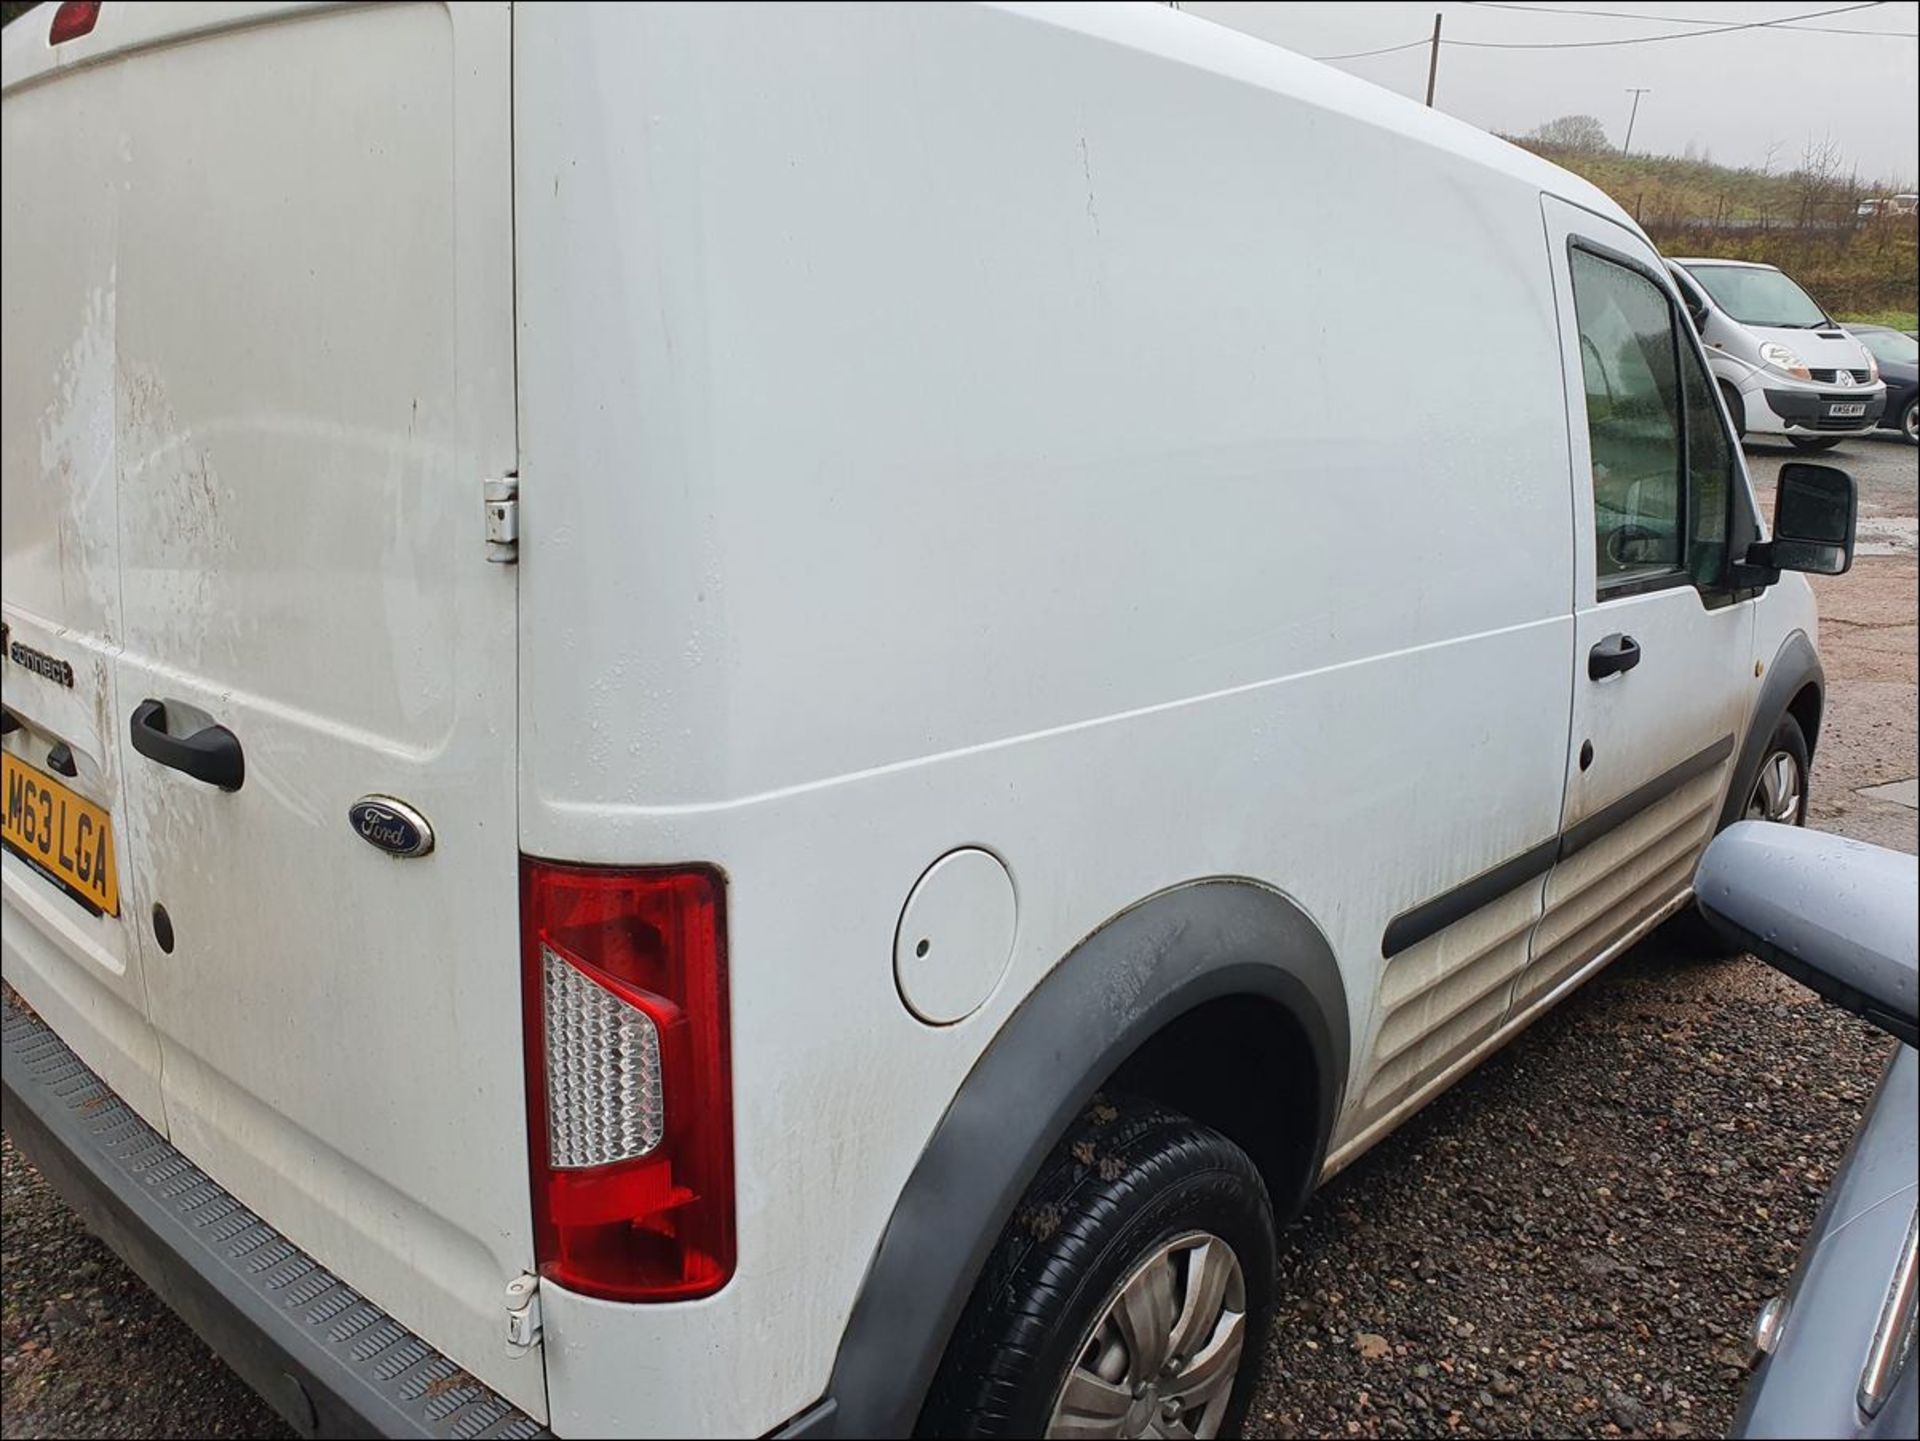 13/63 FORD TRANSIT CONNECT T200 - 1753cc Van (White, 177k) - Image 9 of 10